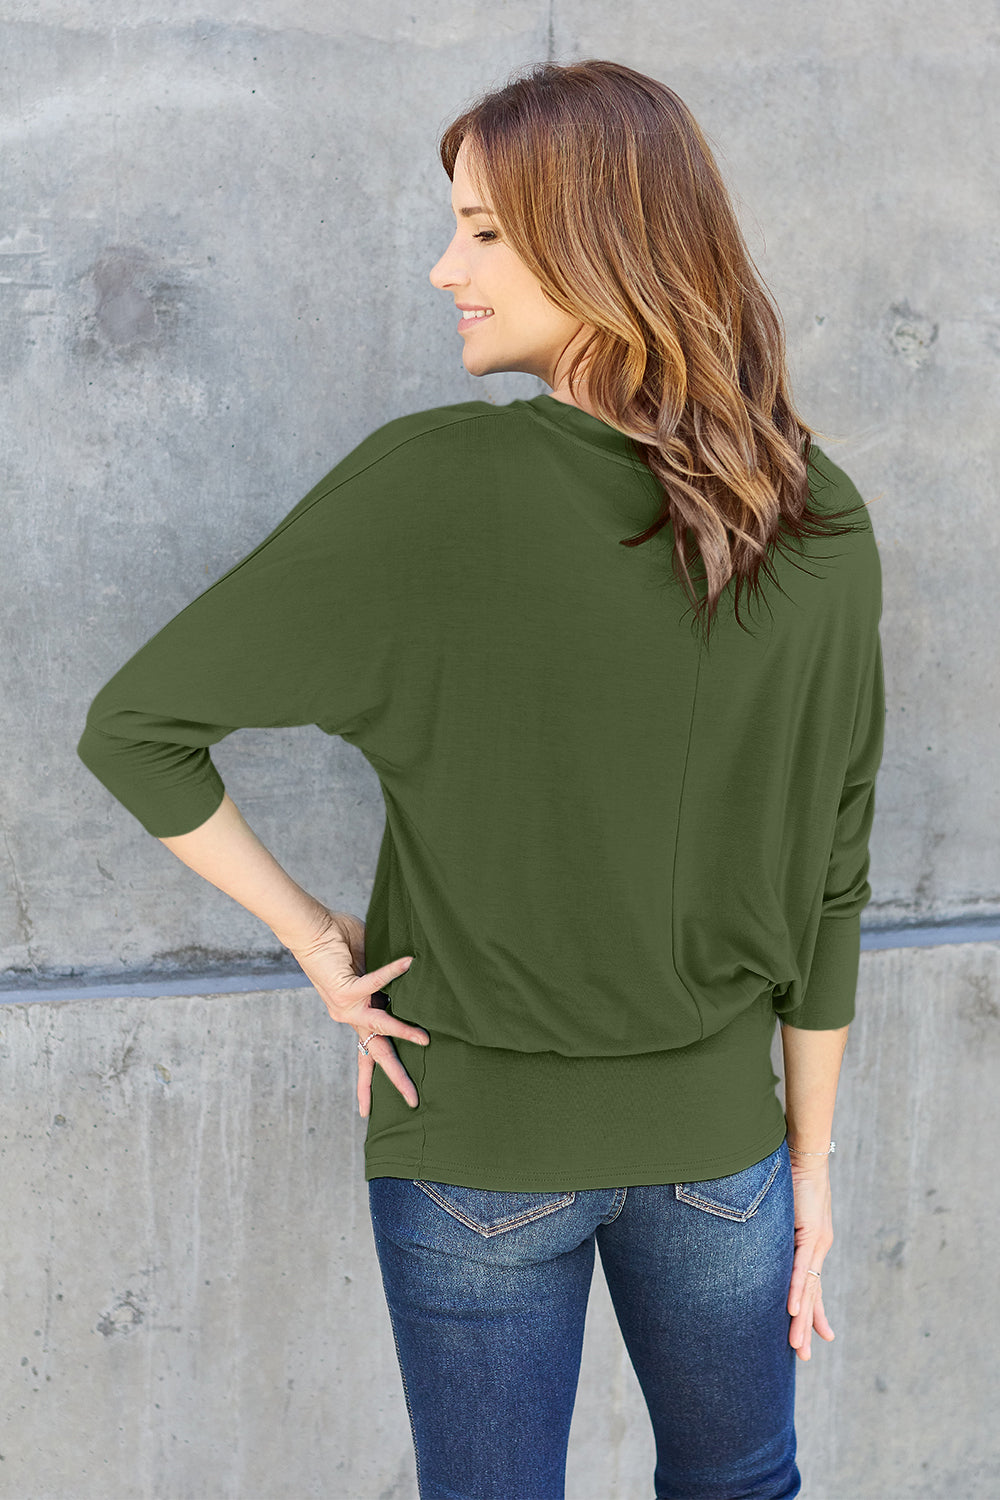 Dark Green Color Round Neck Batwing Sleeve Blouse